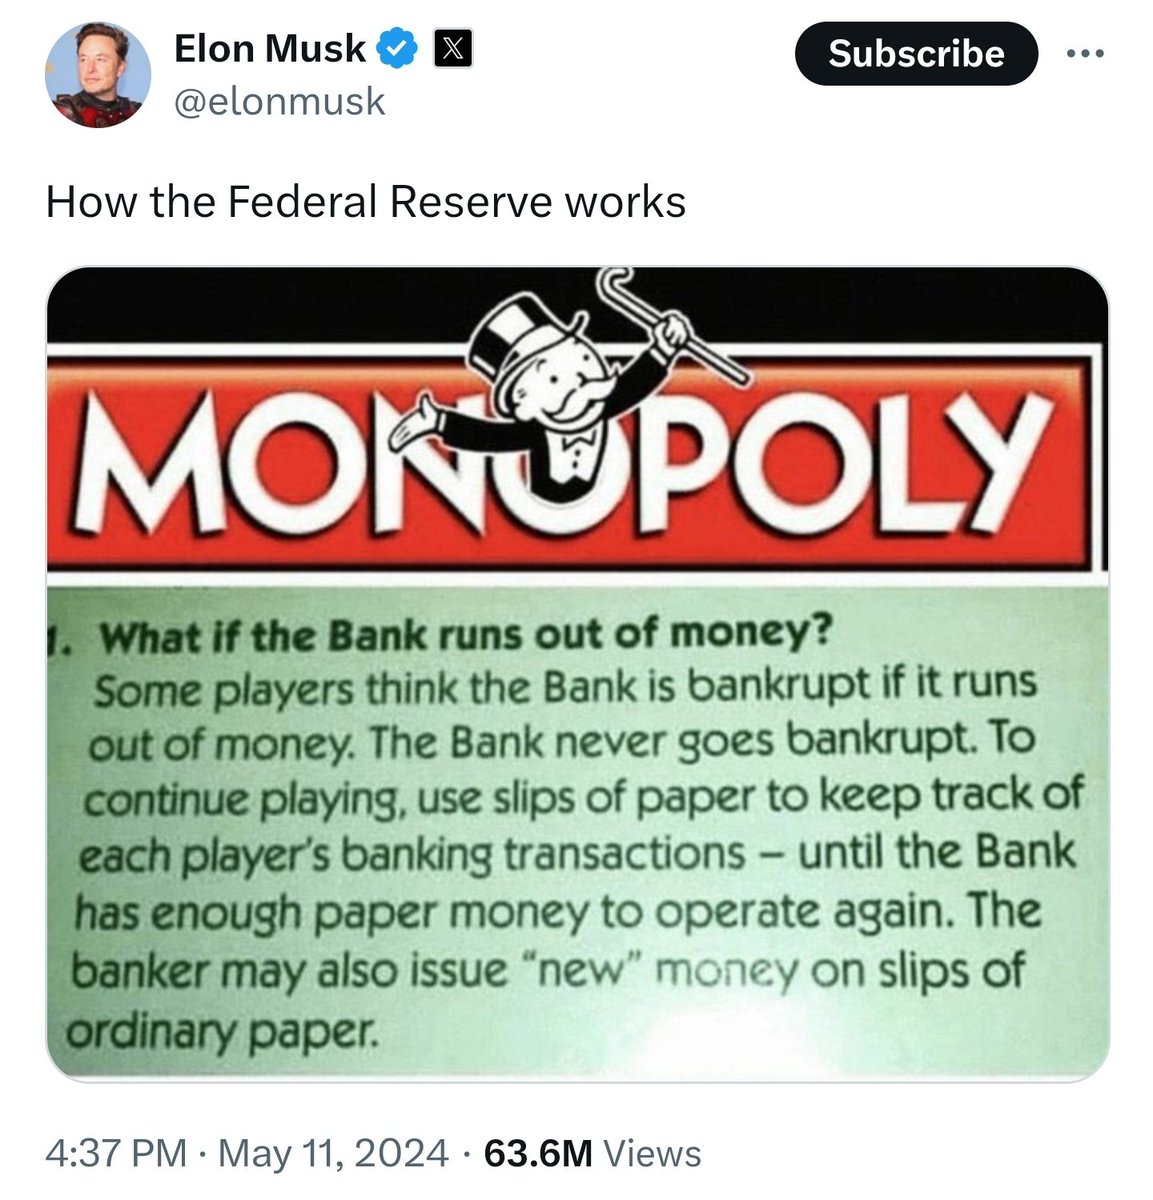 Just five days ago, Elon Musk tweeted this meme about how the Federal Reserve never runs out of money because it can just keep printing more.

Today, Representative Thomas Massie introduced a bill to permanently end the Federal Reserve System.

Who still believes in coincidences?